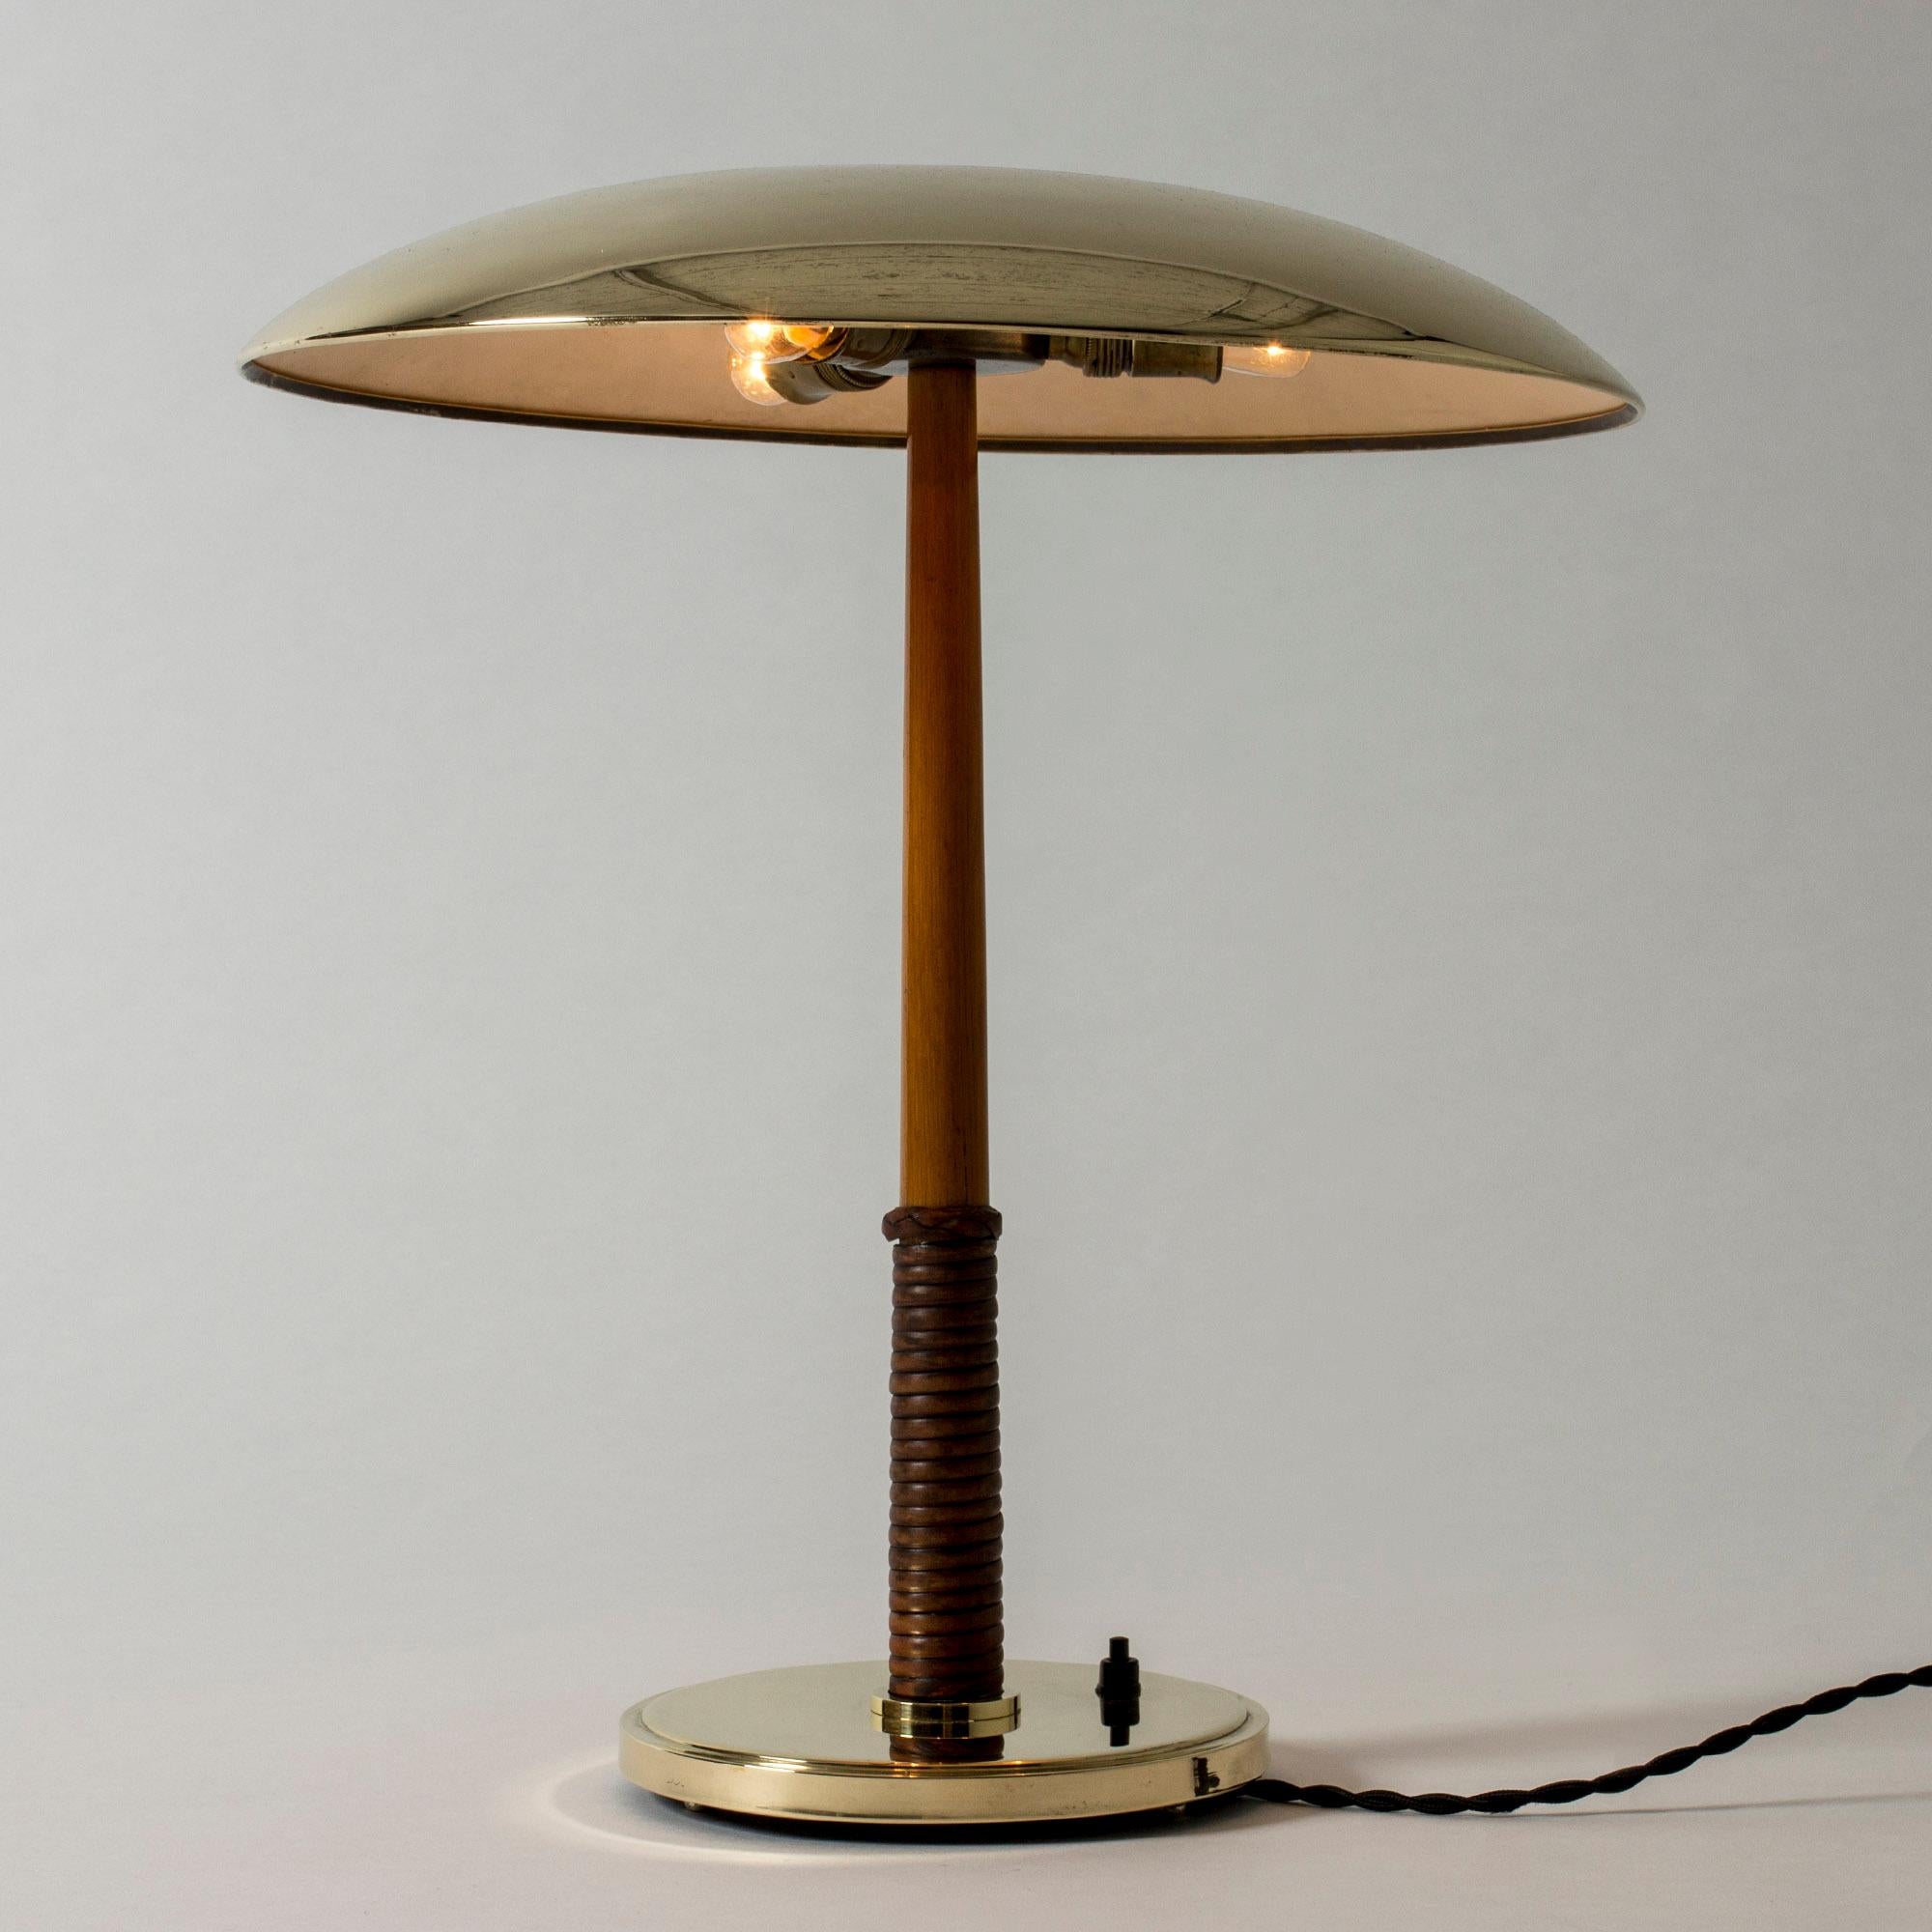 Elegant brass table lamp from Böhlmarks, with a smooth concave disc shade. Mahogany handle wreathed with leather around the base.